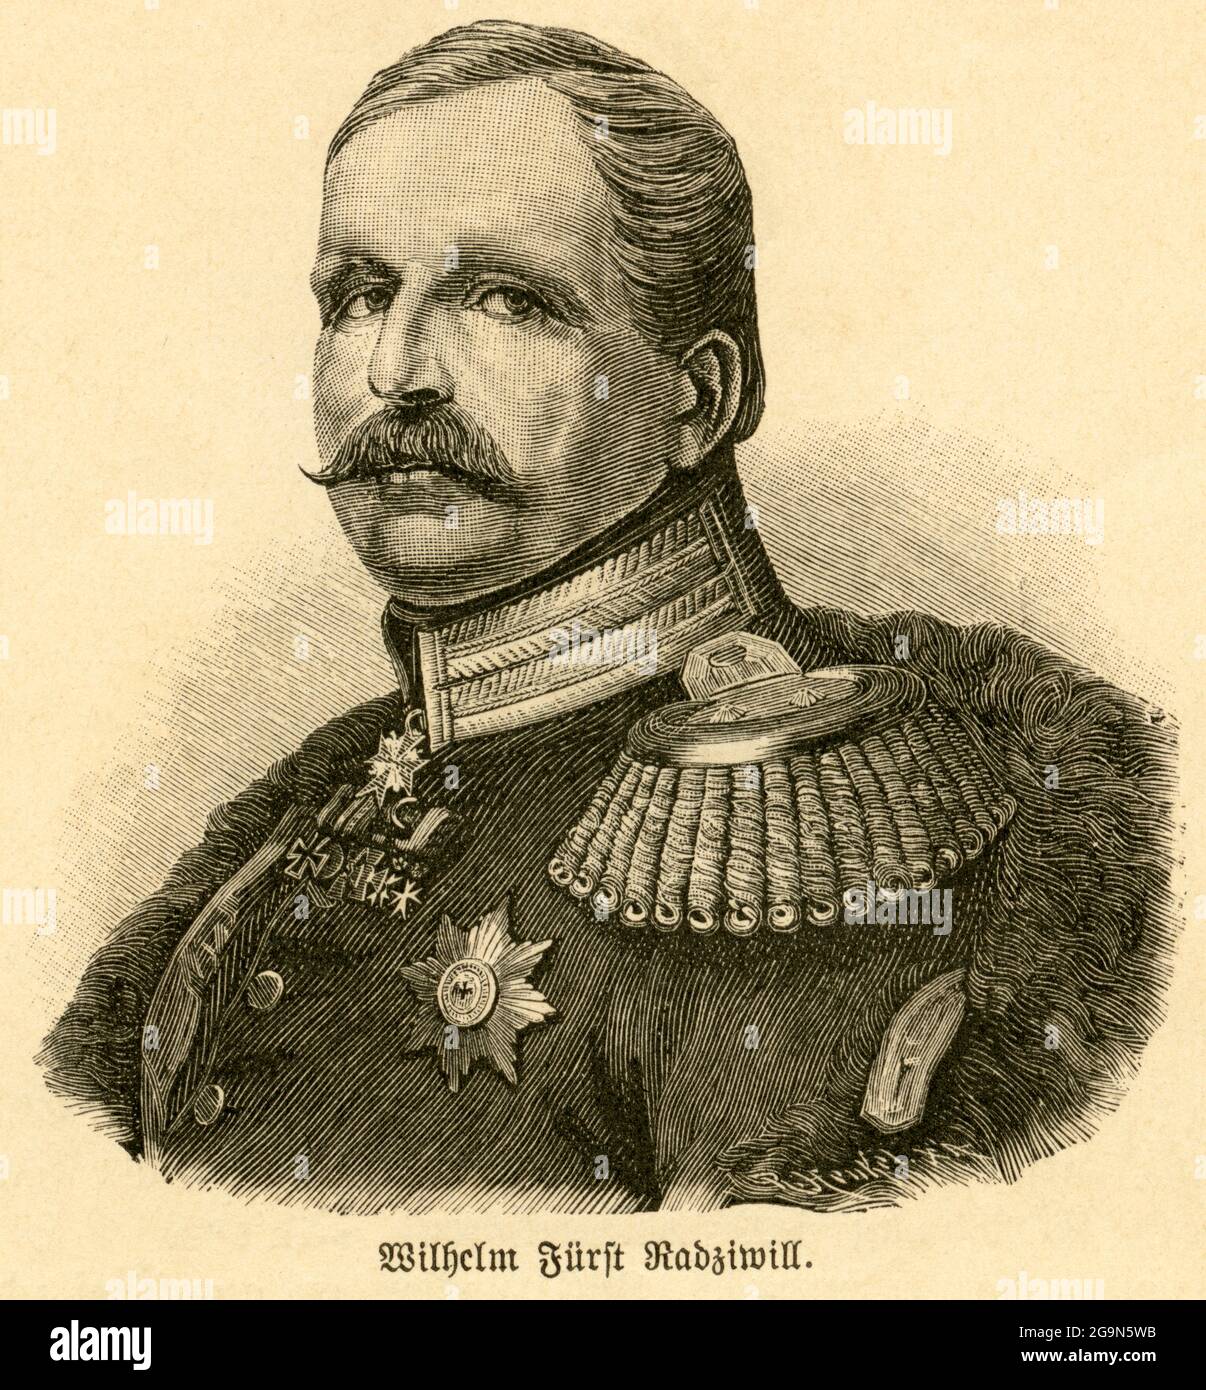 Europe, Germany, Berlin, Wilhelm von Radziwill, Prussian general, ARTIST'S COPYRIGHT HAS NOT TO BE CLEARED Stock Photo